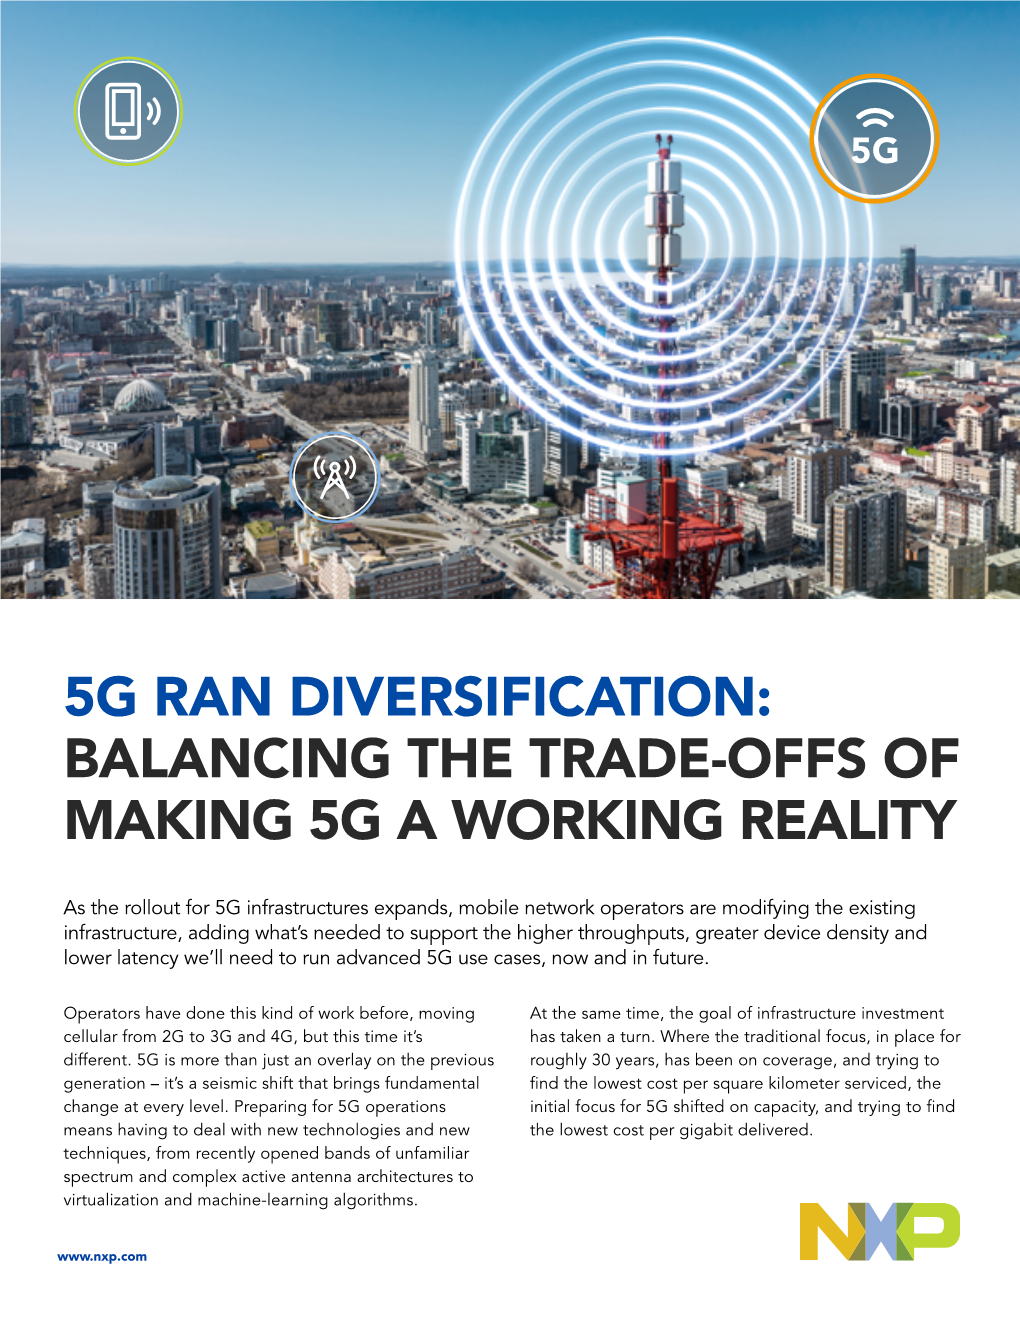 5G Ran Diversification: Balancing the Trade-Offs of Making 5G a Working Reality